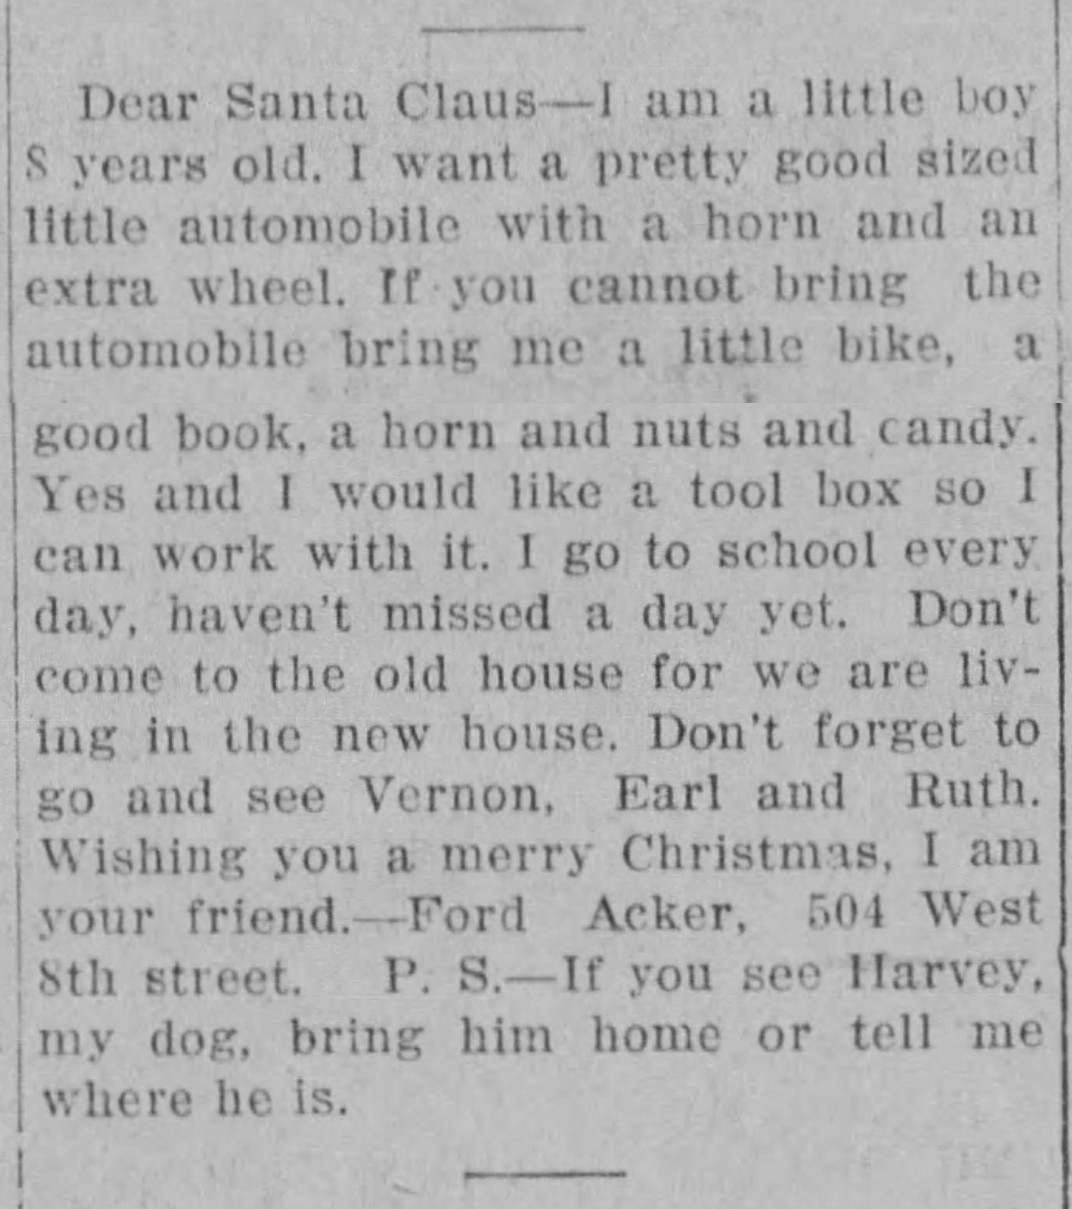 (source: The Junction City (KS) Daily Union, December 22, 1915.)